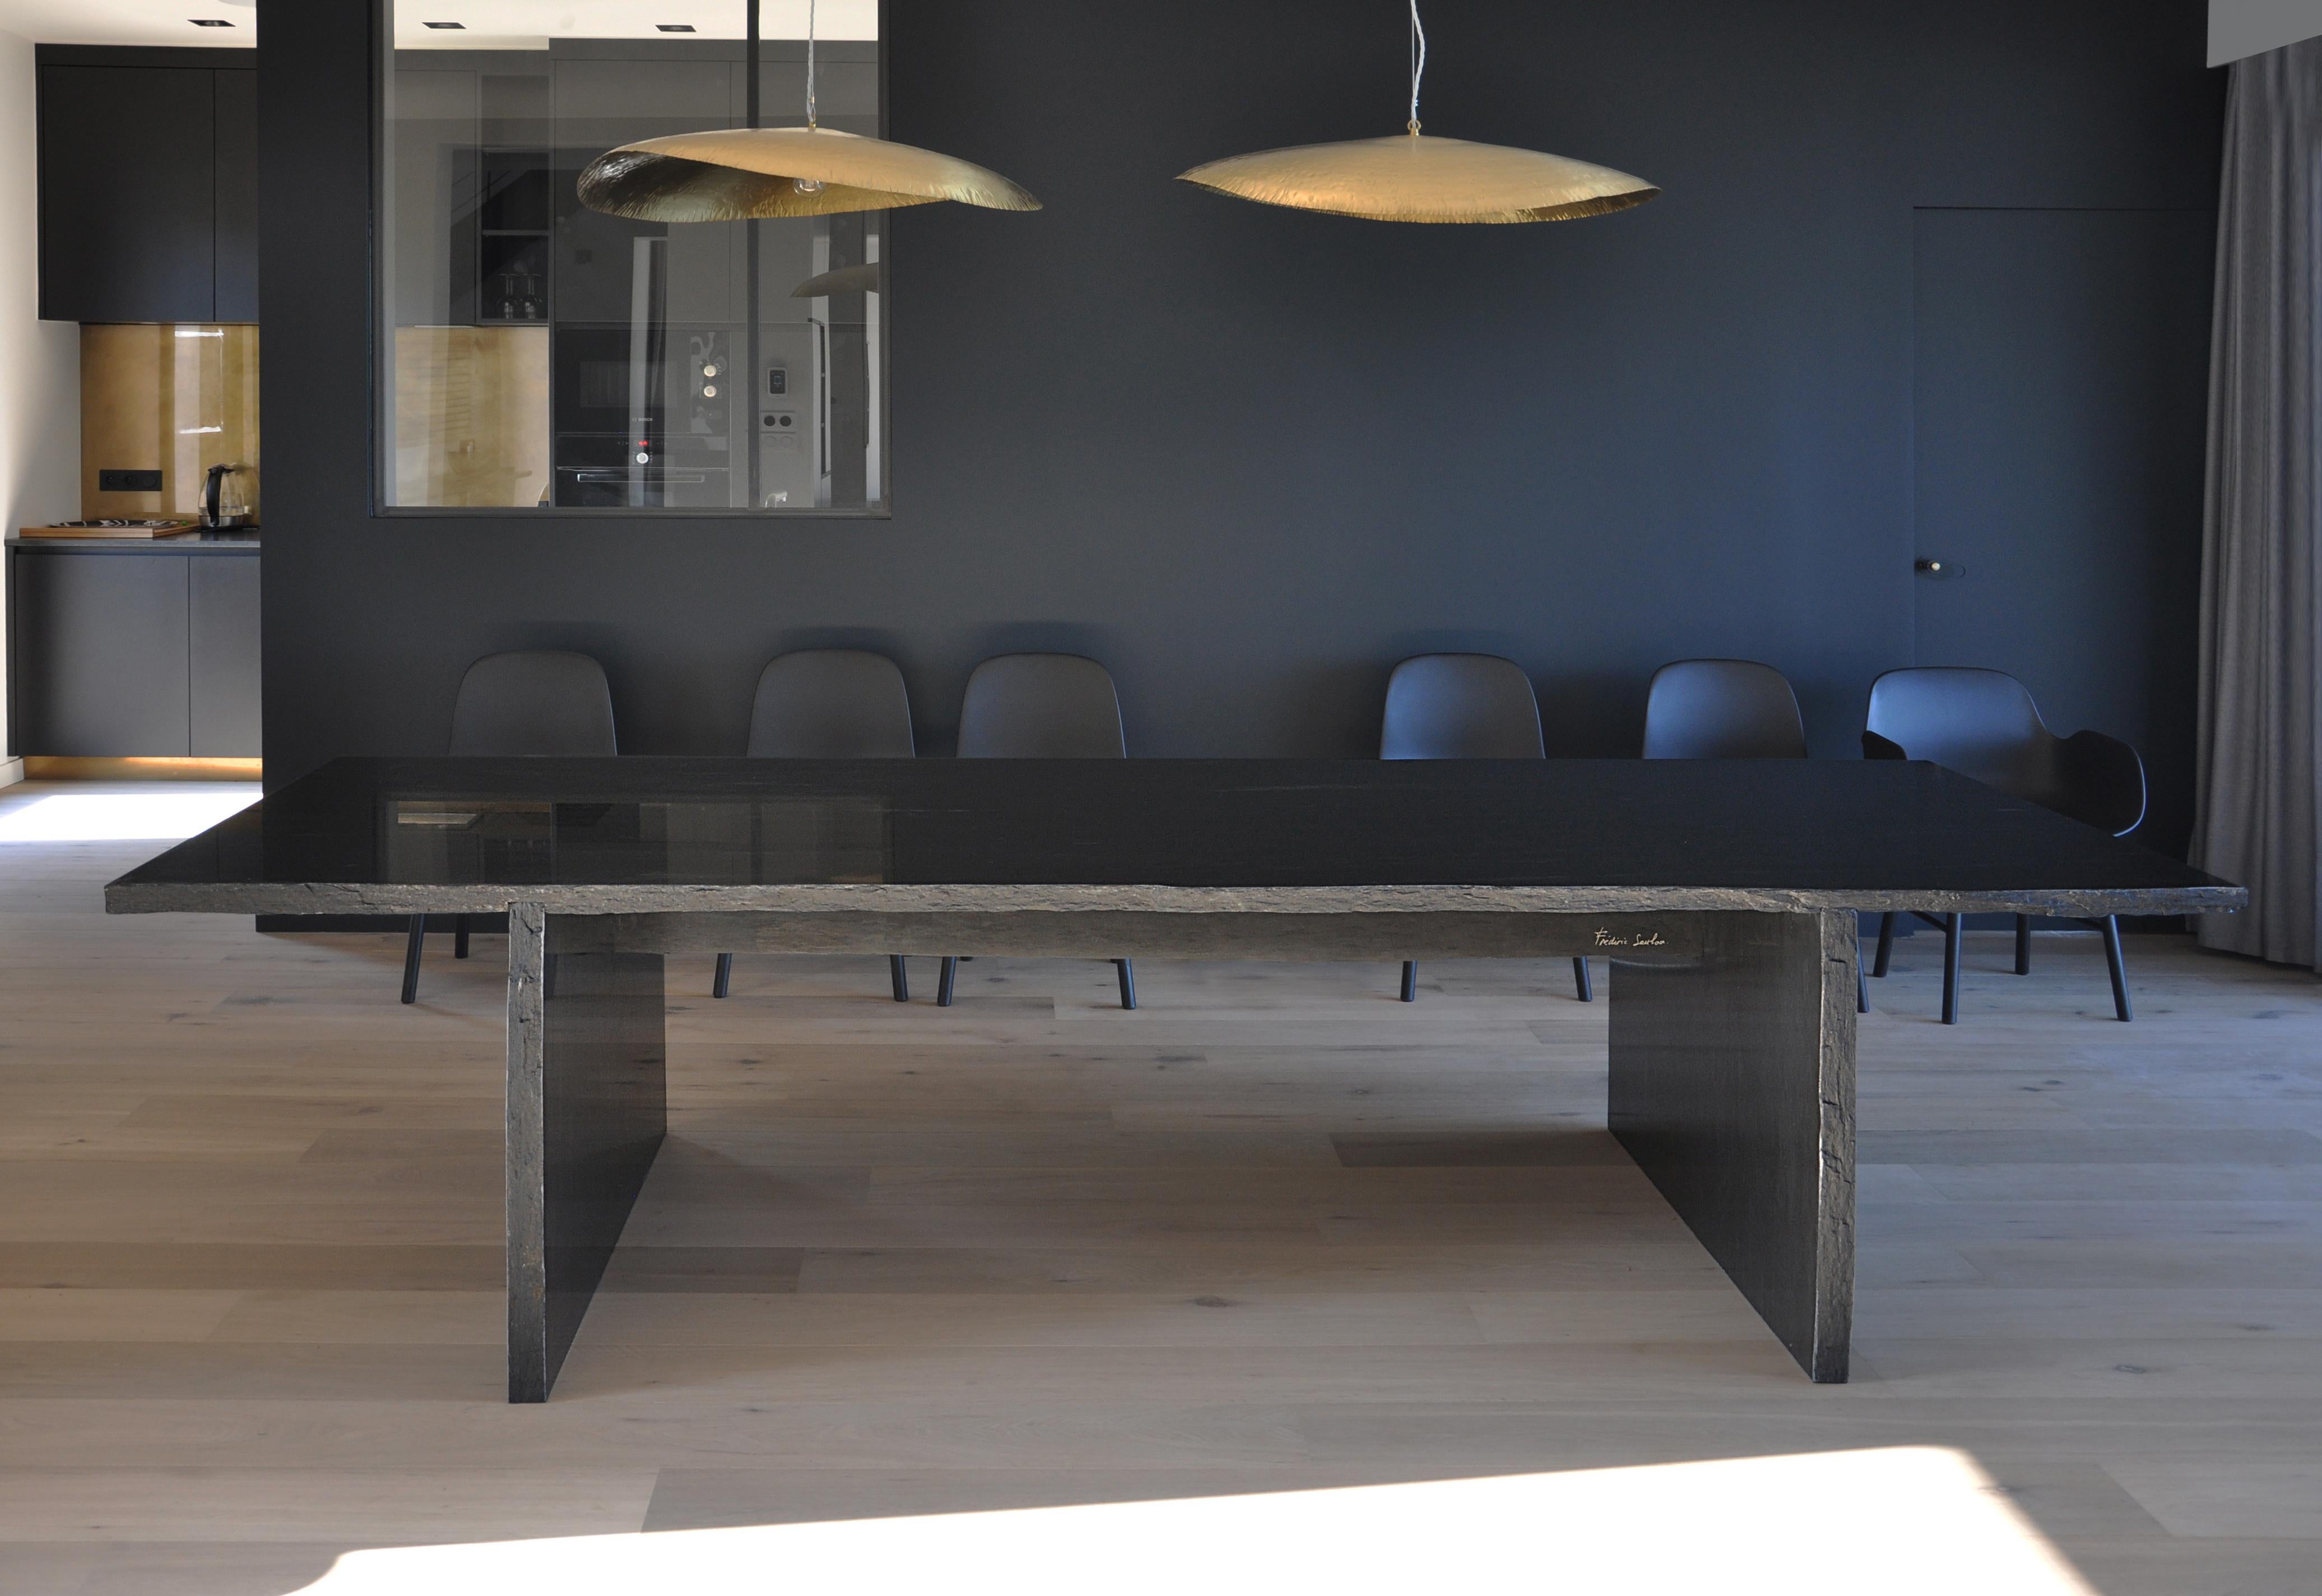 Marble long slate dining table signed by Frédéric Saulou
Designer: Frédéric Saulou.
Materials: Tre´laze´ black slate.
Dimensions: 75 x 300 x 110 cm
Edition of eight.
Signed and numbered.

